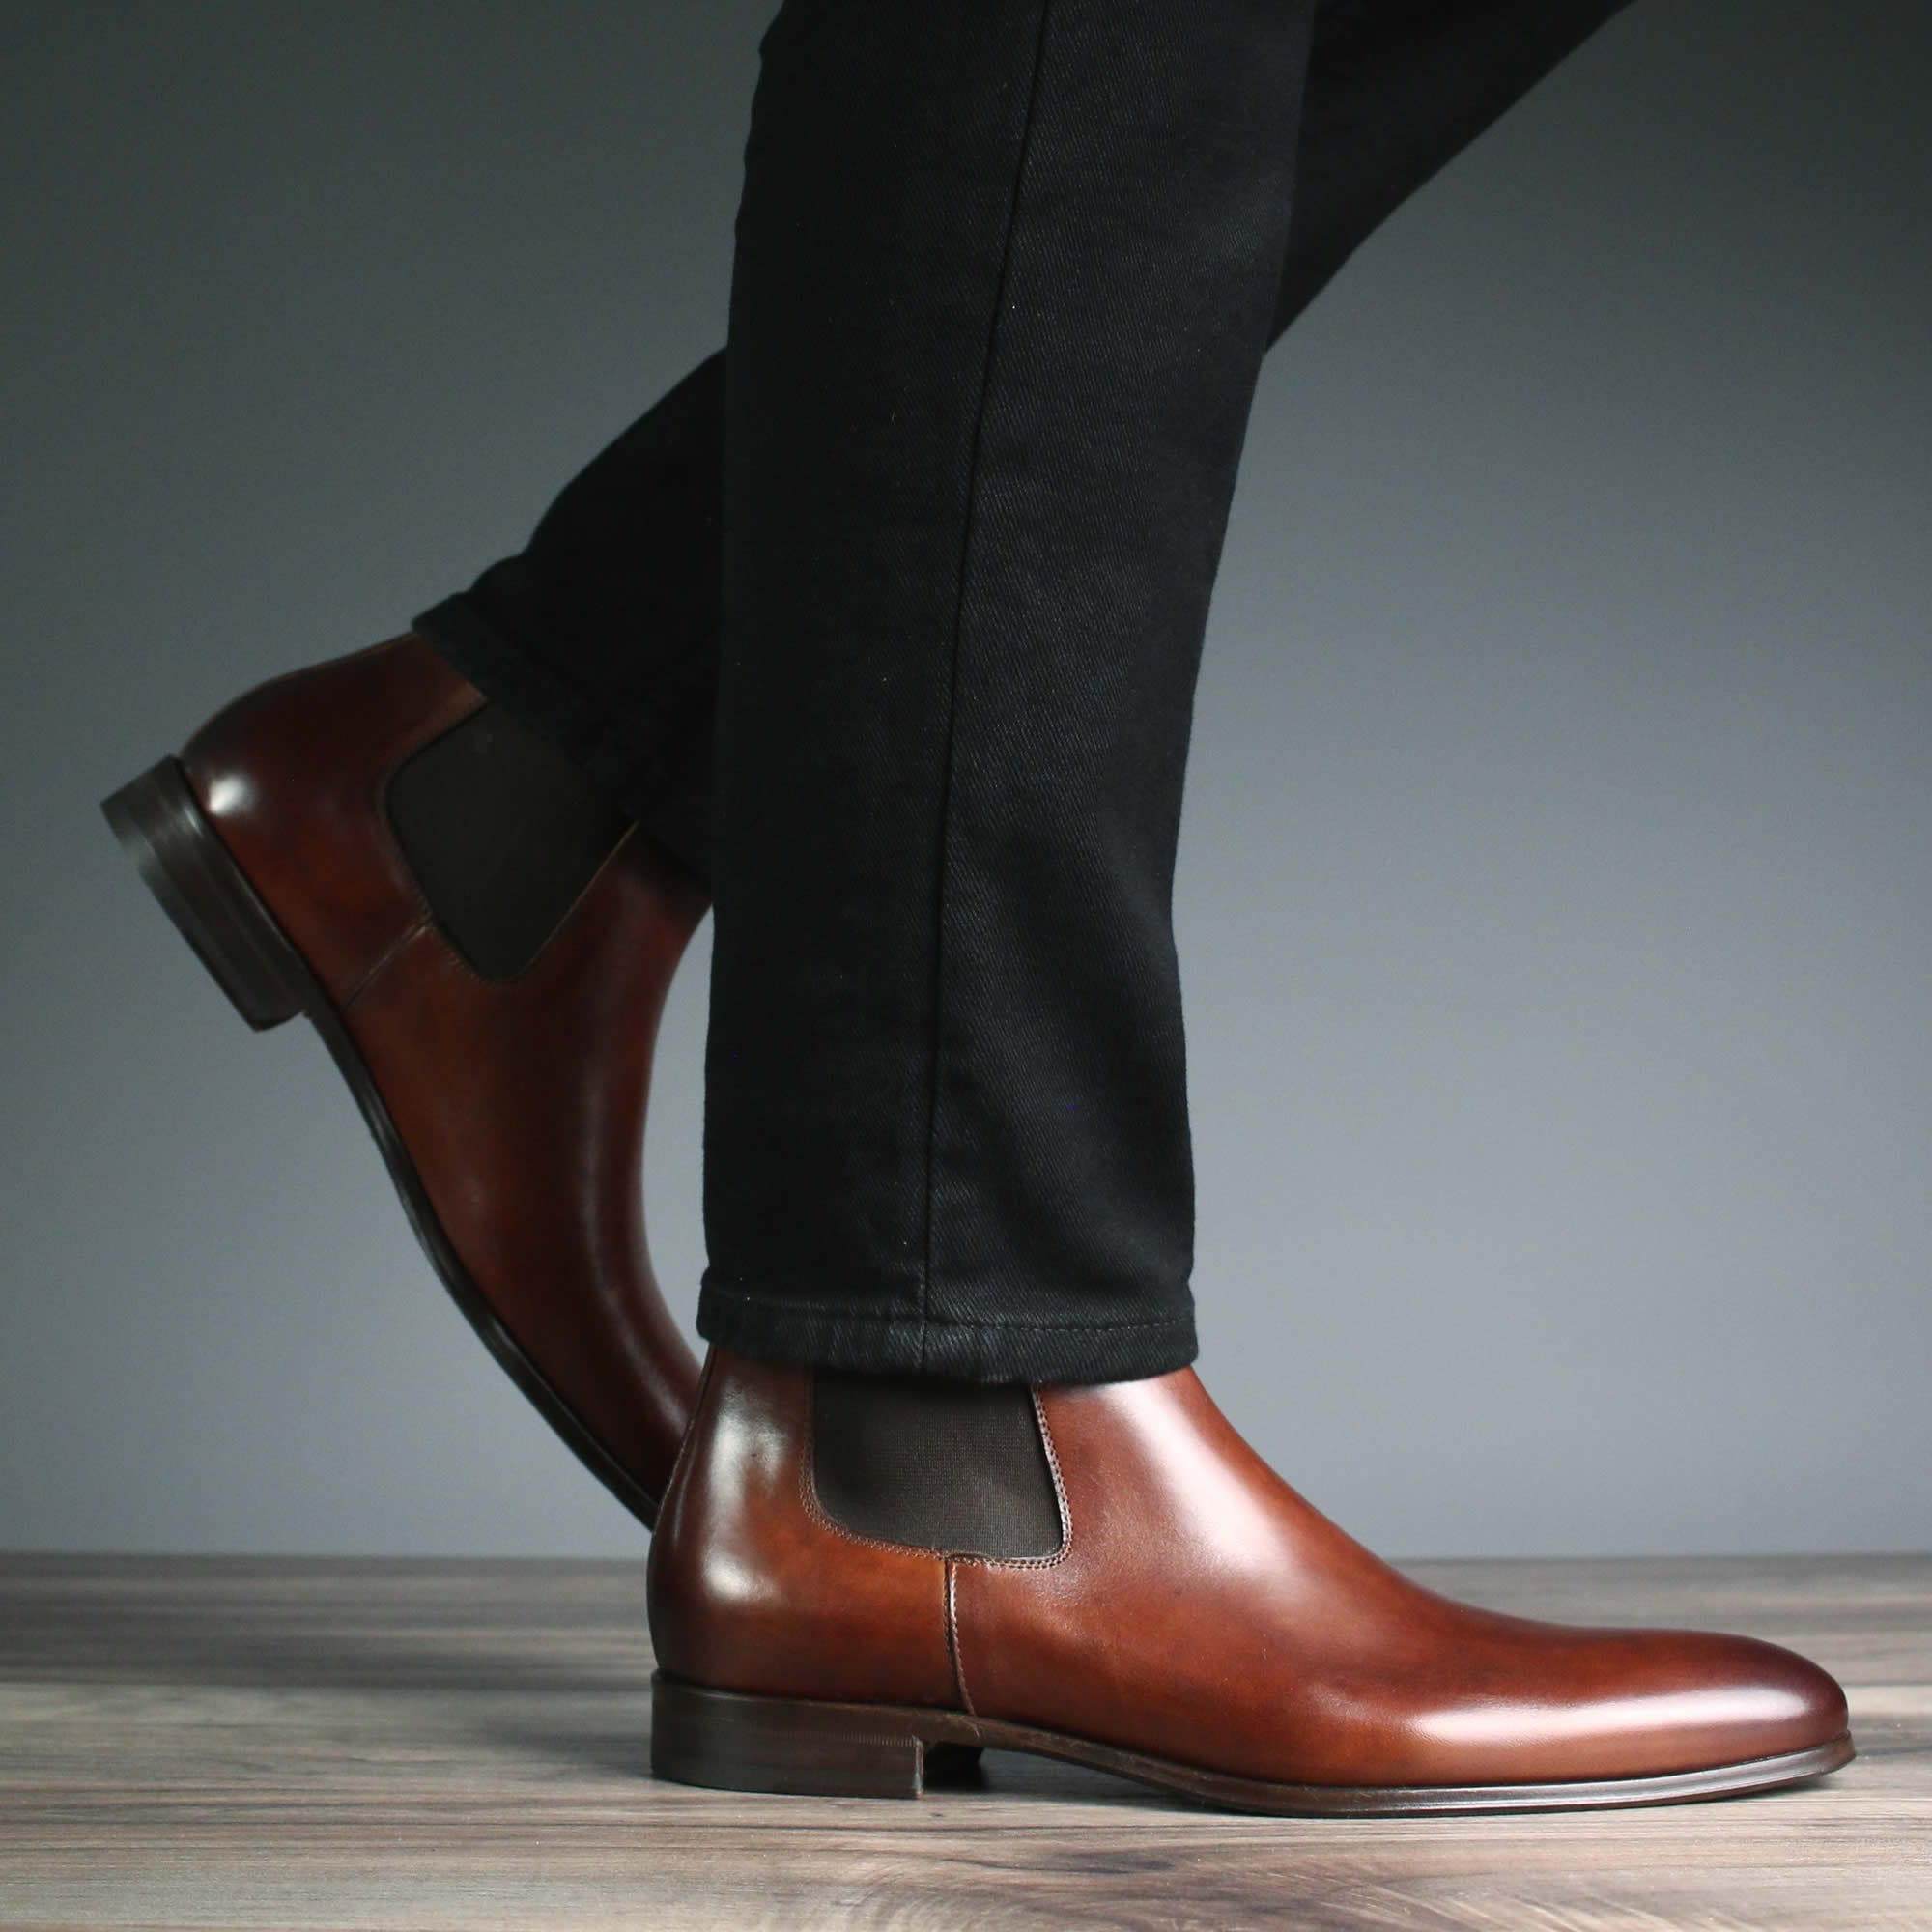 12 Best Dress Boots for Men 2023 - Chelsea, Chukka, and More